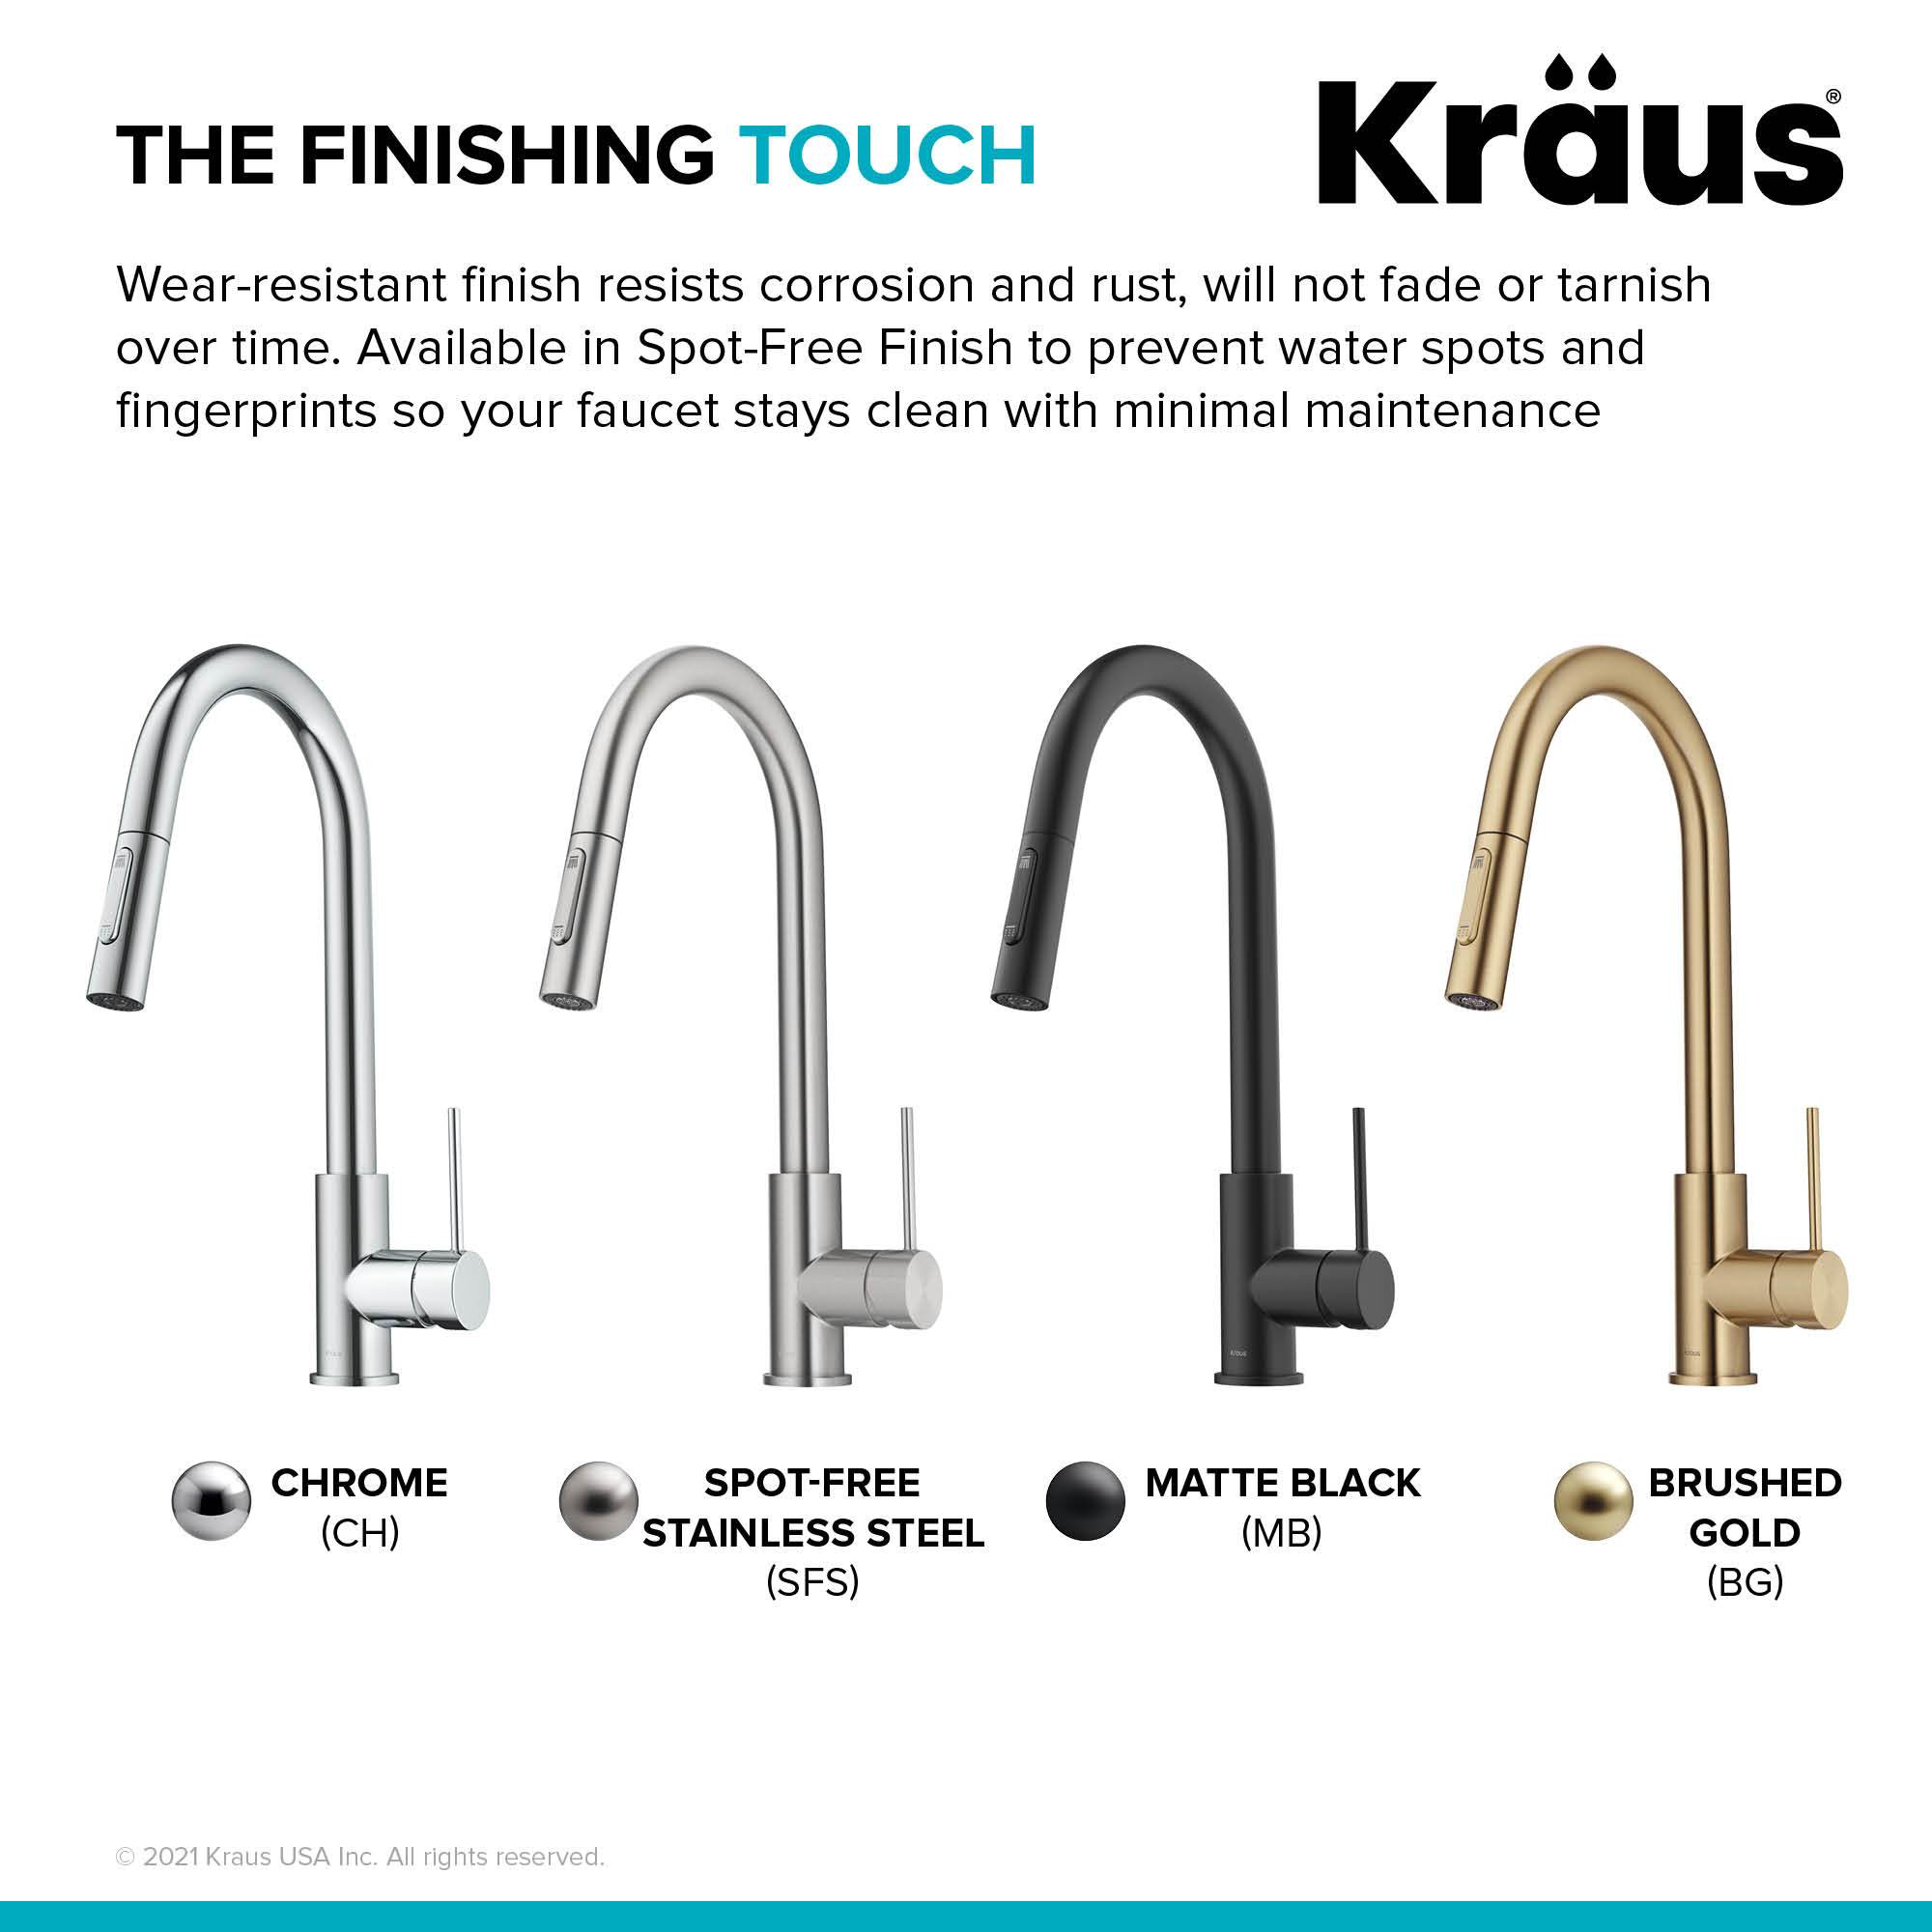 KRAUS New Oletto Contemporary Single Handle Pull Down Kitchen Faucet in Chrome KPF-3104CH | DirectSinks